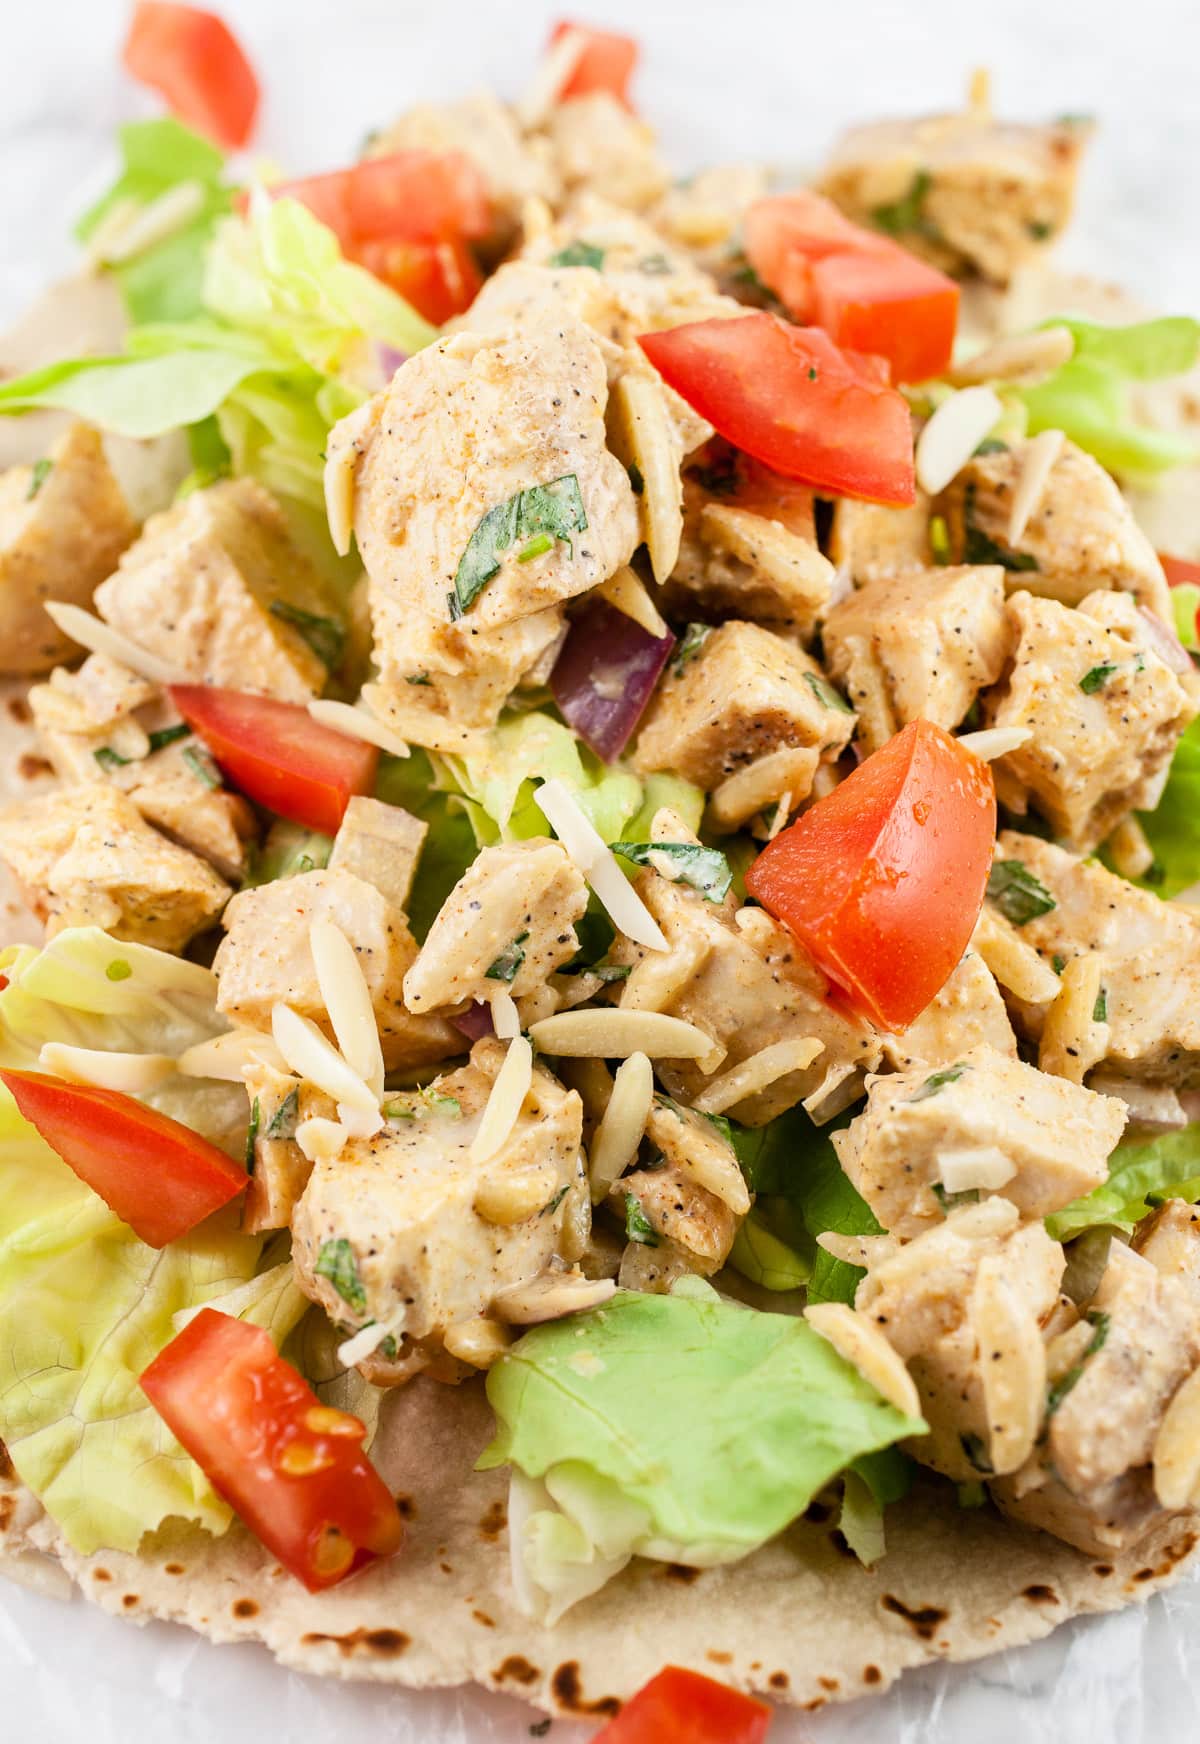 Lemon tarragon chicken salad with diced tomatoes, lettuce, and slivered almonds on a wrap.